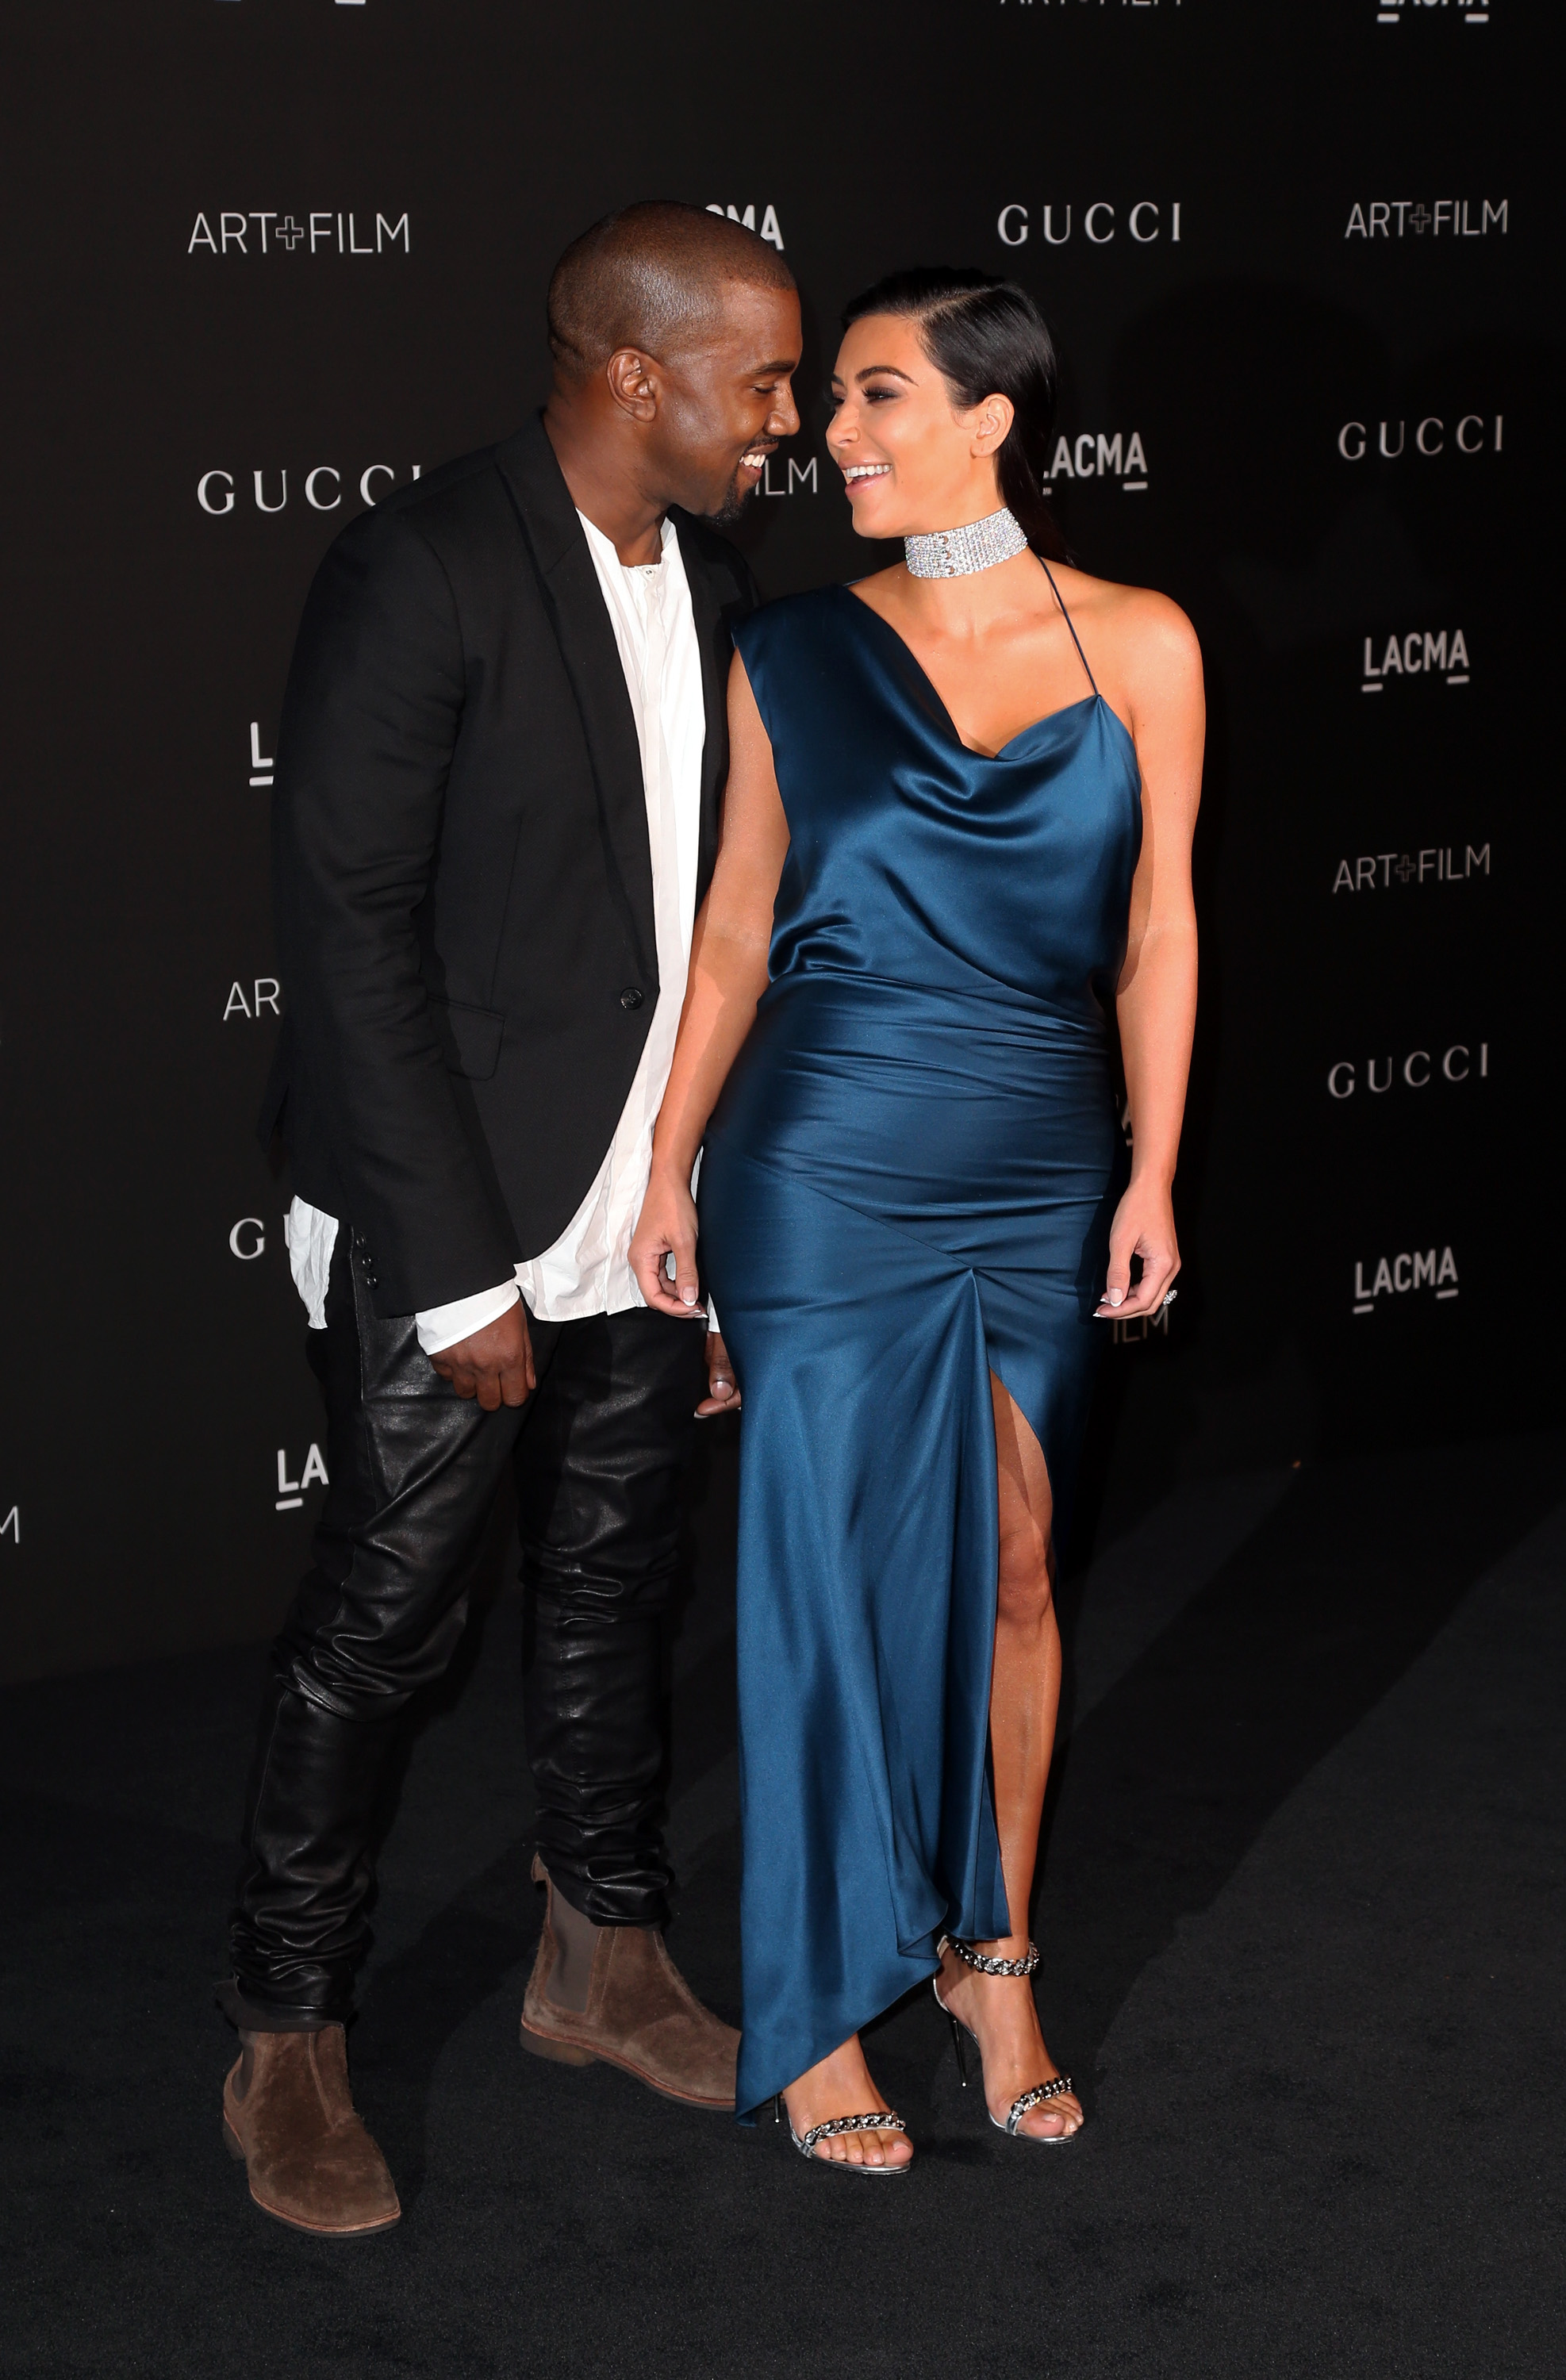 Kanye West and Kim Kardashian at the LACMA Art + Film Gala in Los Angeles, California on November 1, 2014 | Source: Getty Images